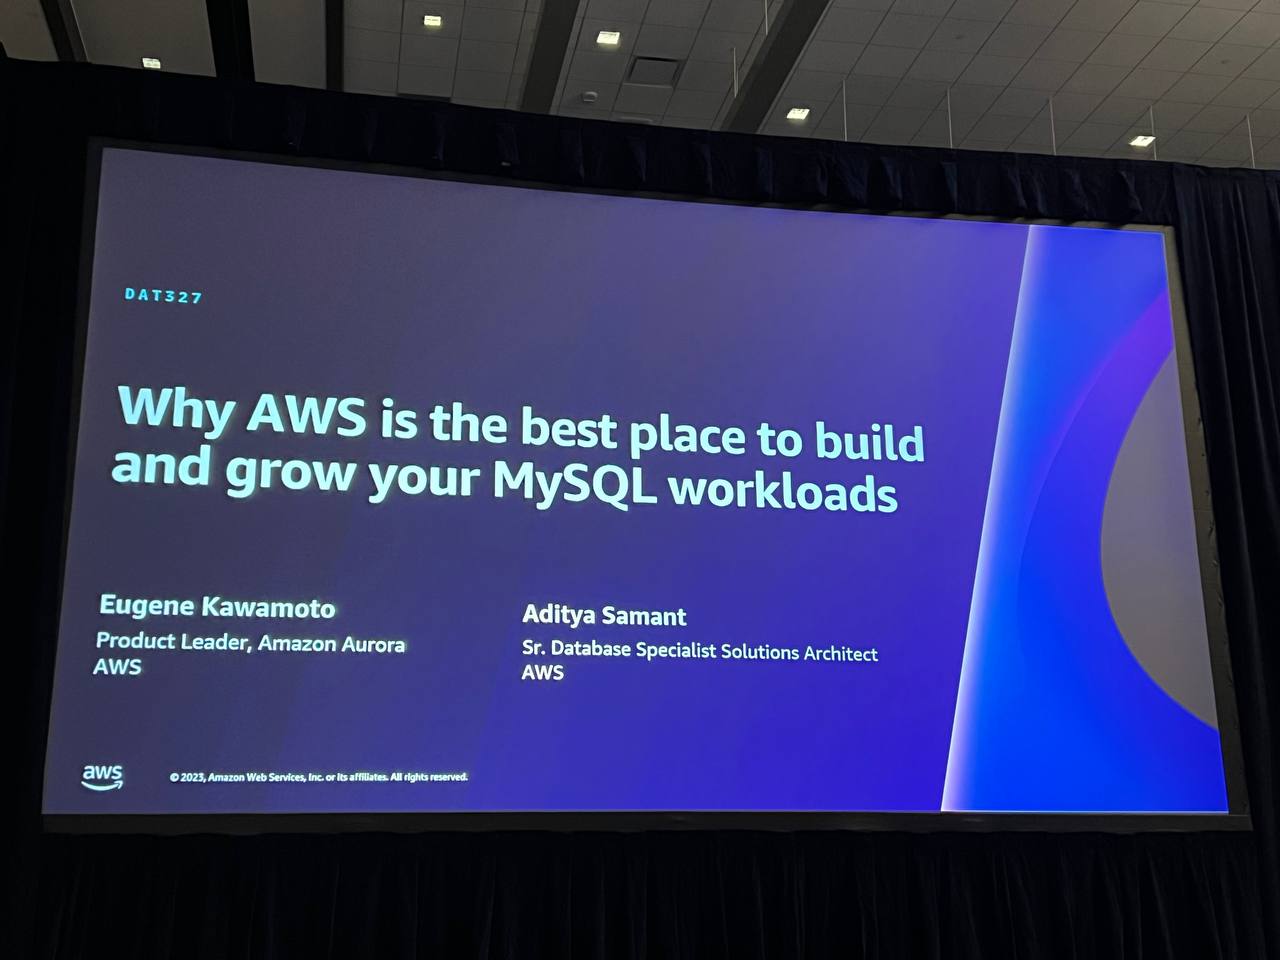 Why AWS is the place to build and grow your MySQL workloads